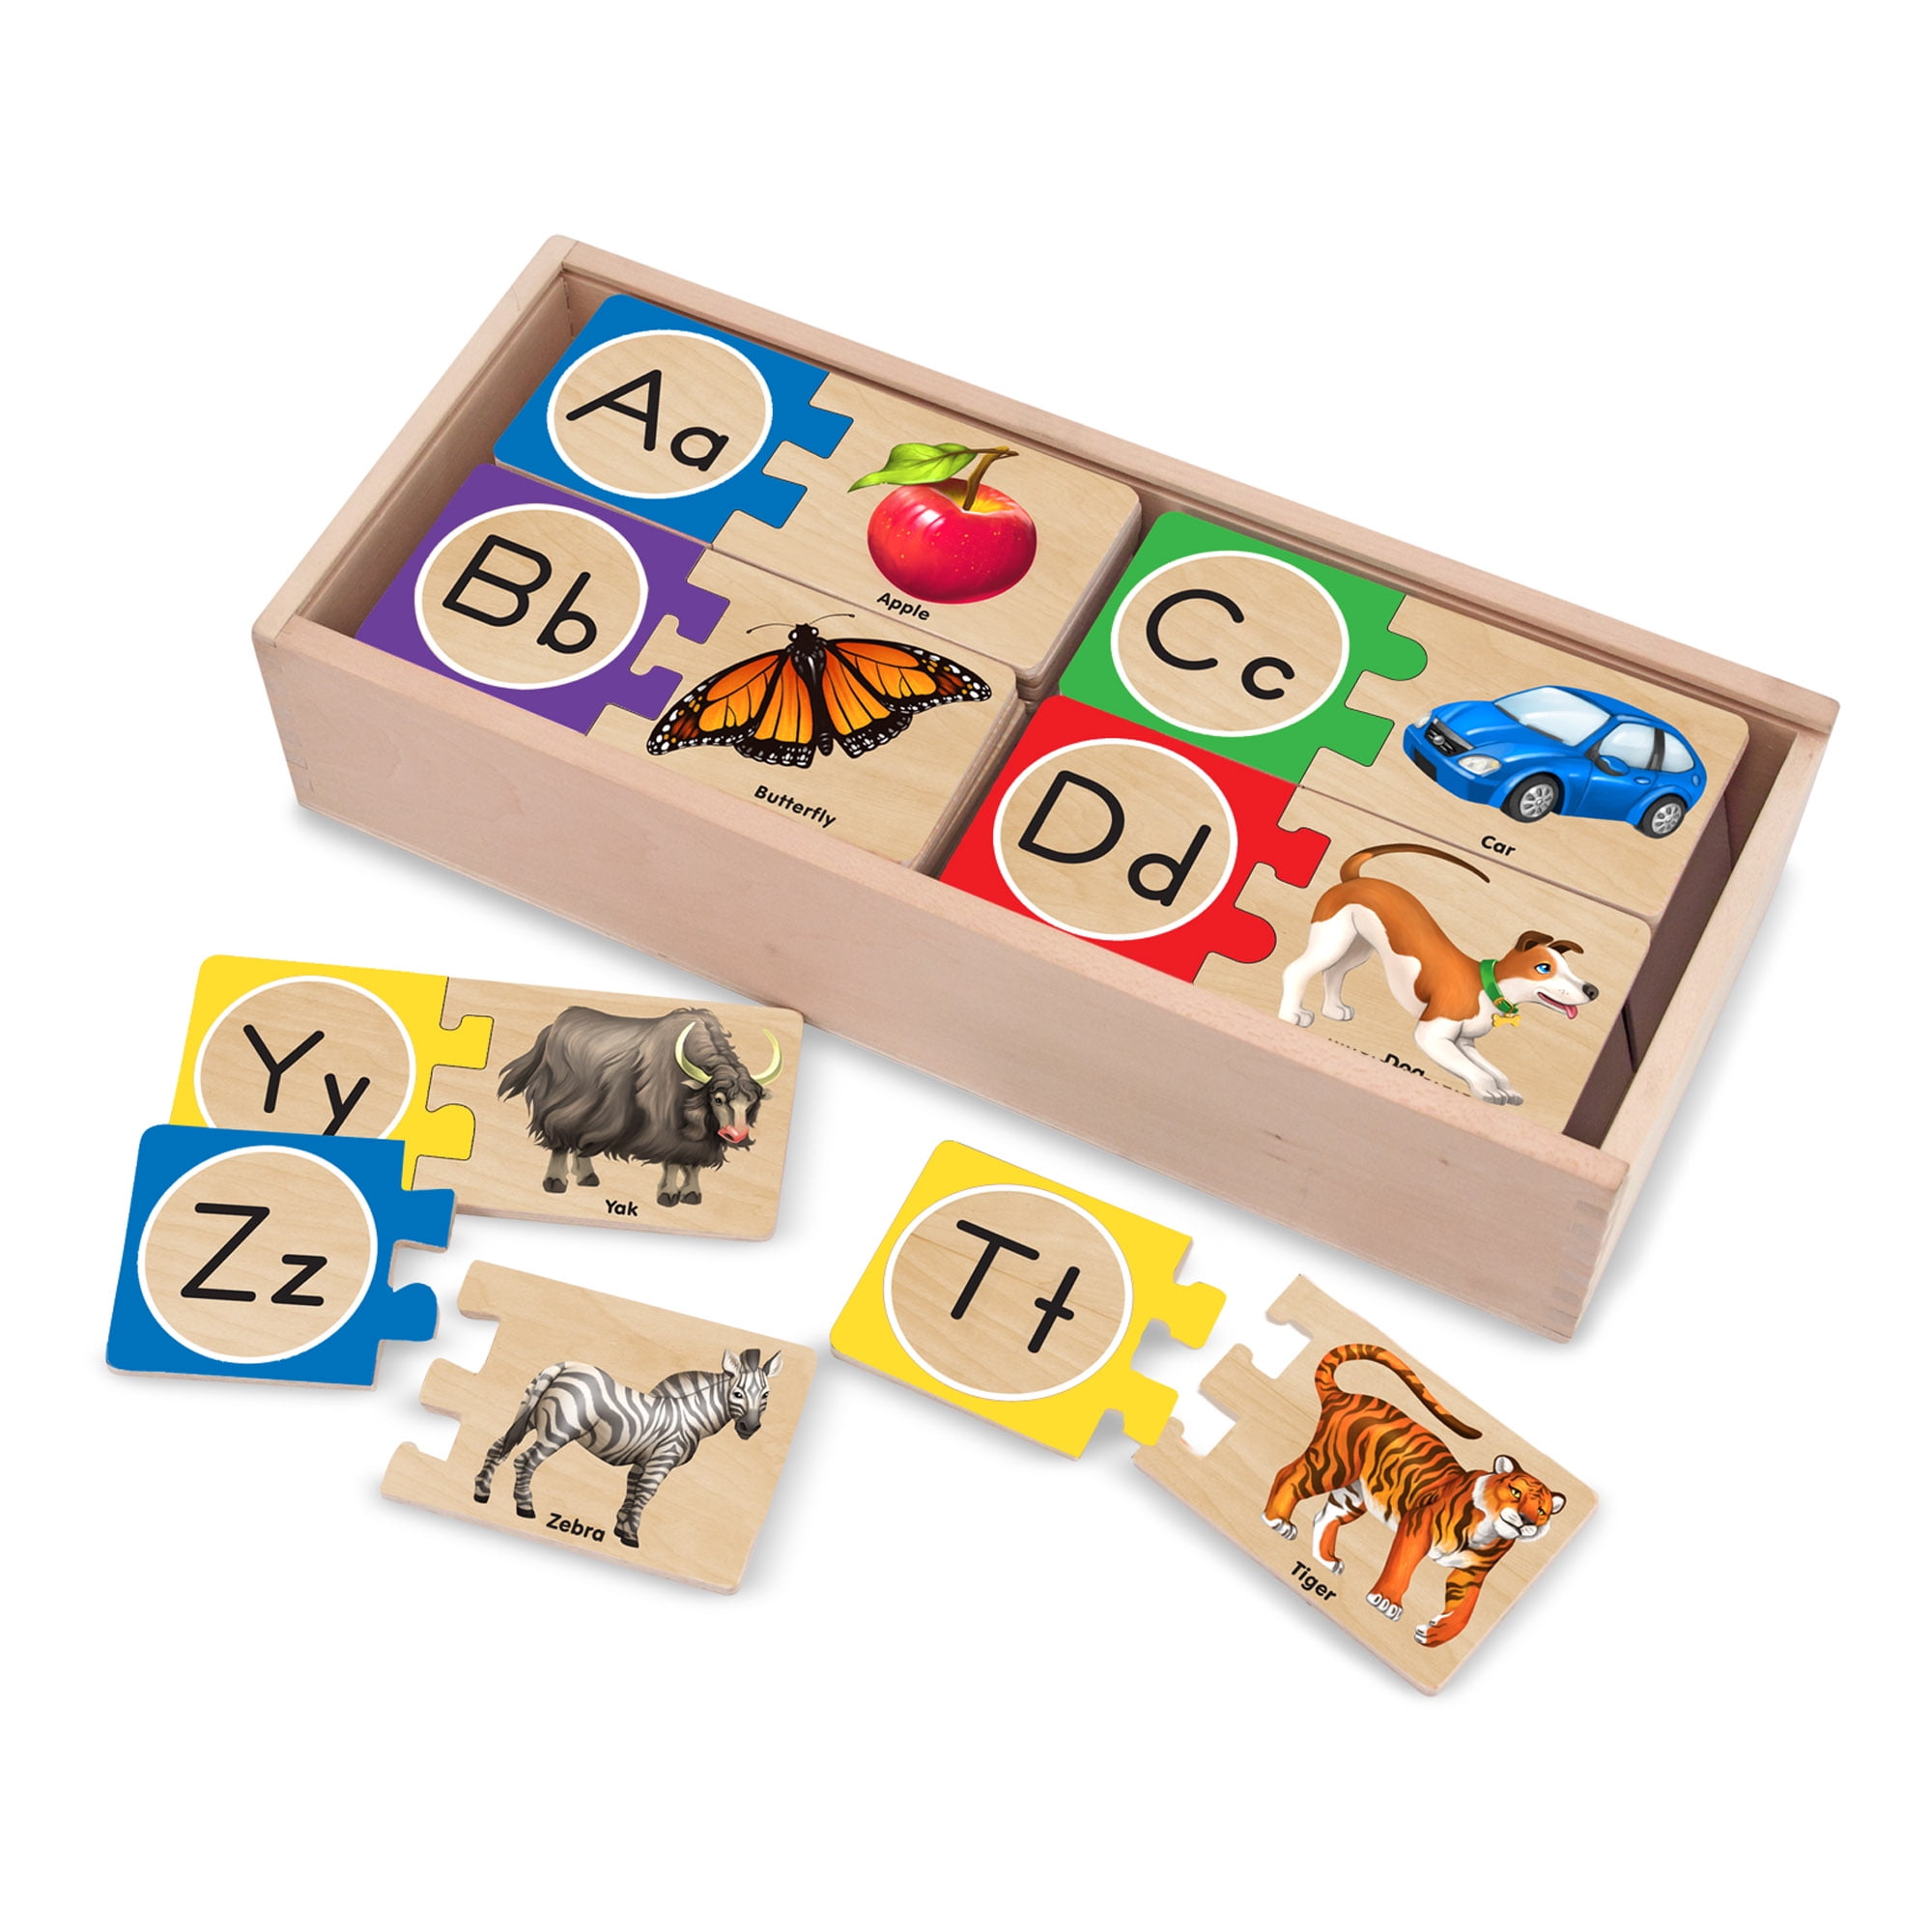 Details about   Melissa & Doug Wooden Jigsaw Puzzles in a Box Dinosaur Organic Wooden Baby Toys 